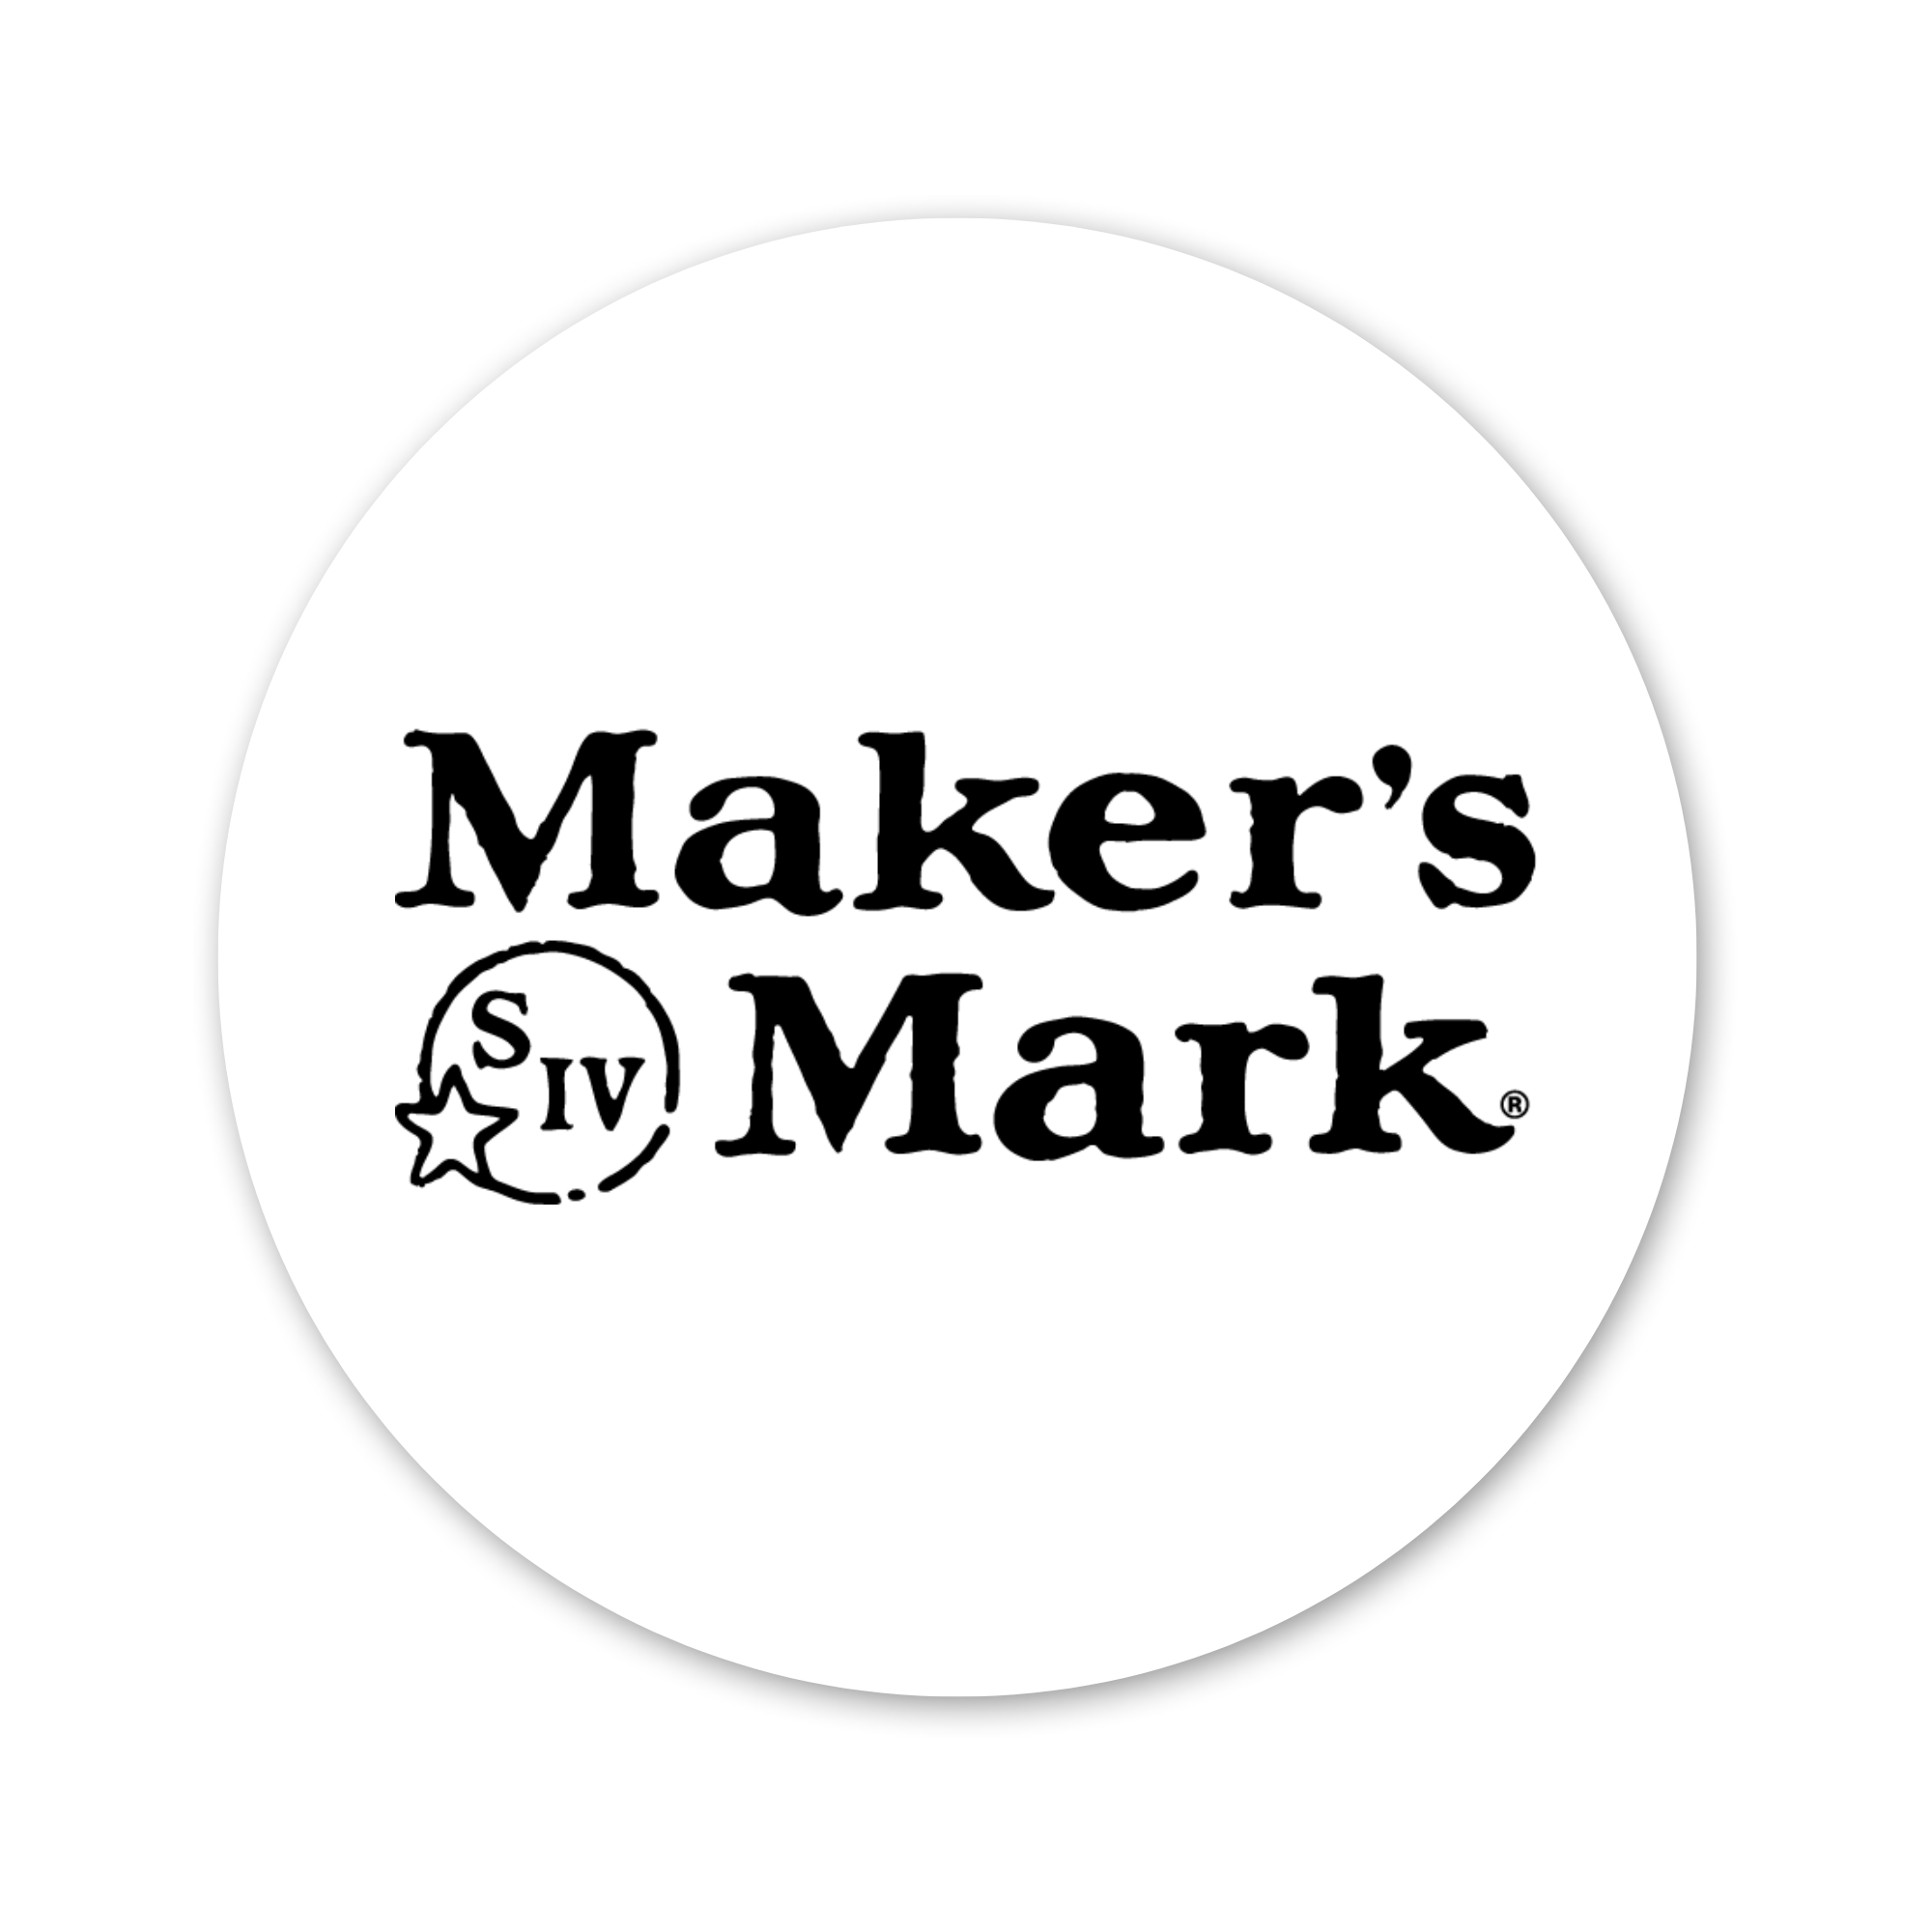 Makers Marks